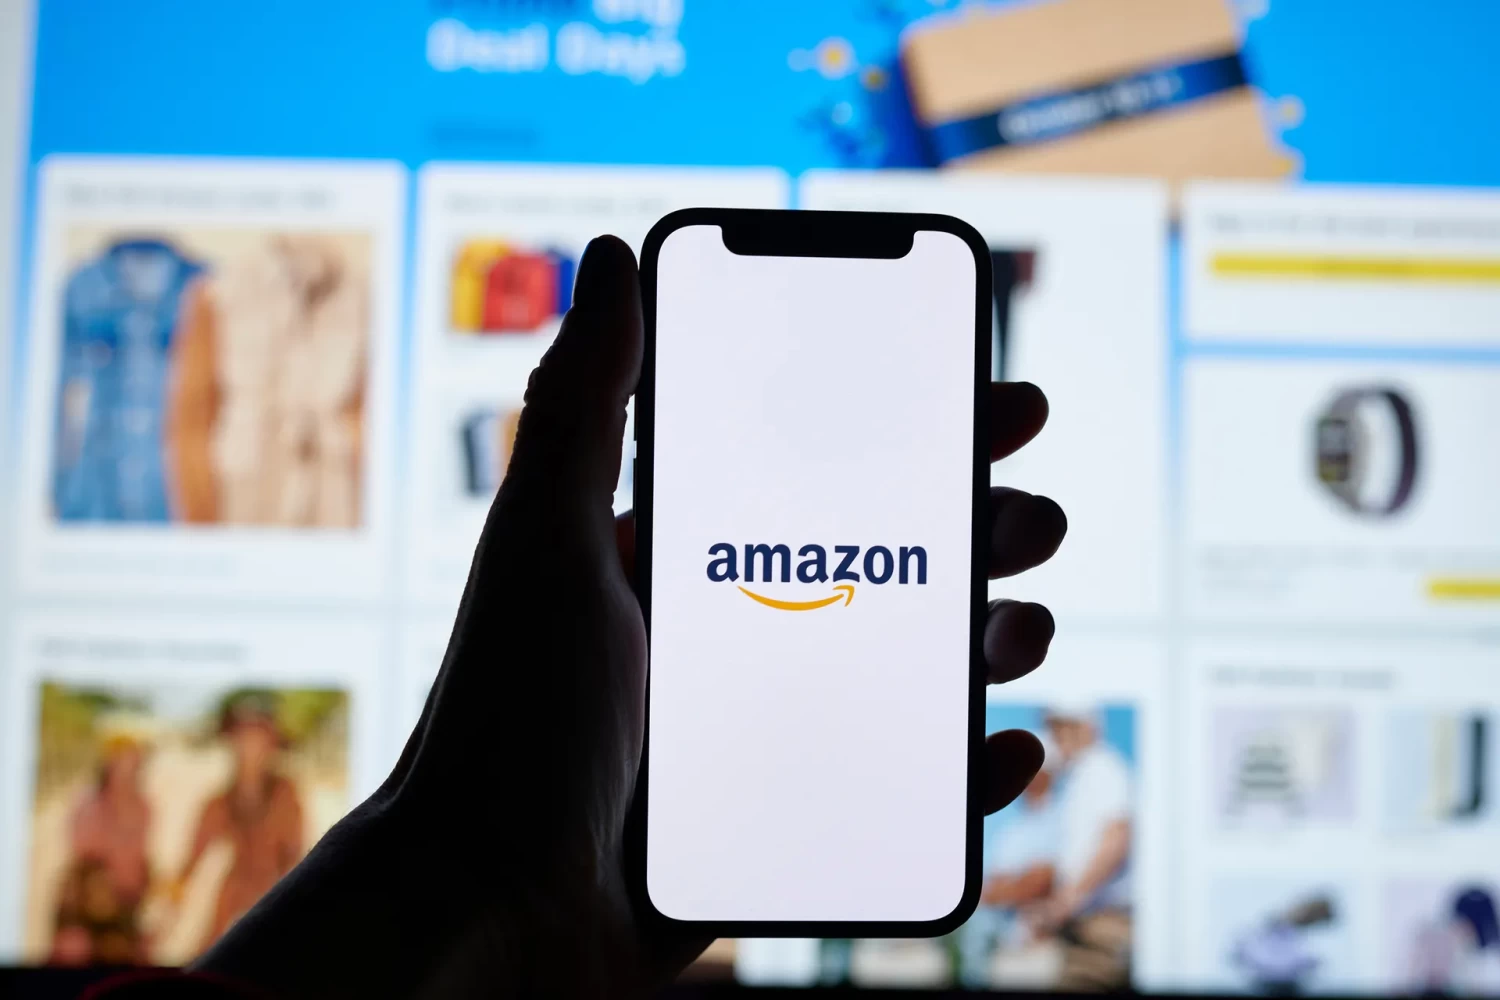 Battling Big Tech has the potential to alienate voters who see Amazon as a source of not just life-changing convenience but also jobs.Photograph by Gabby Jones / Bloomberg / Getty